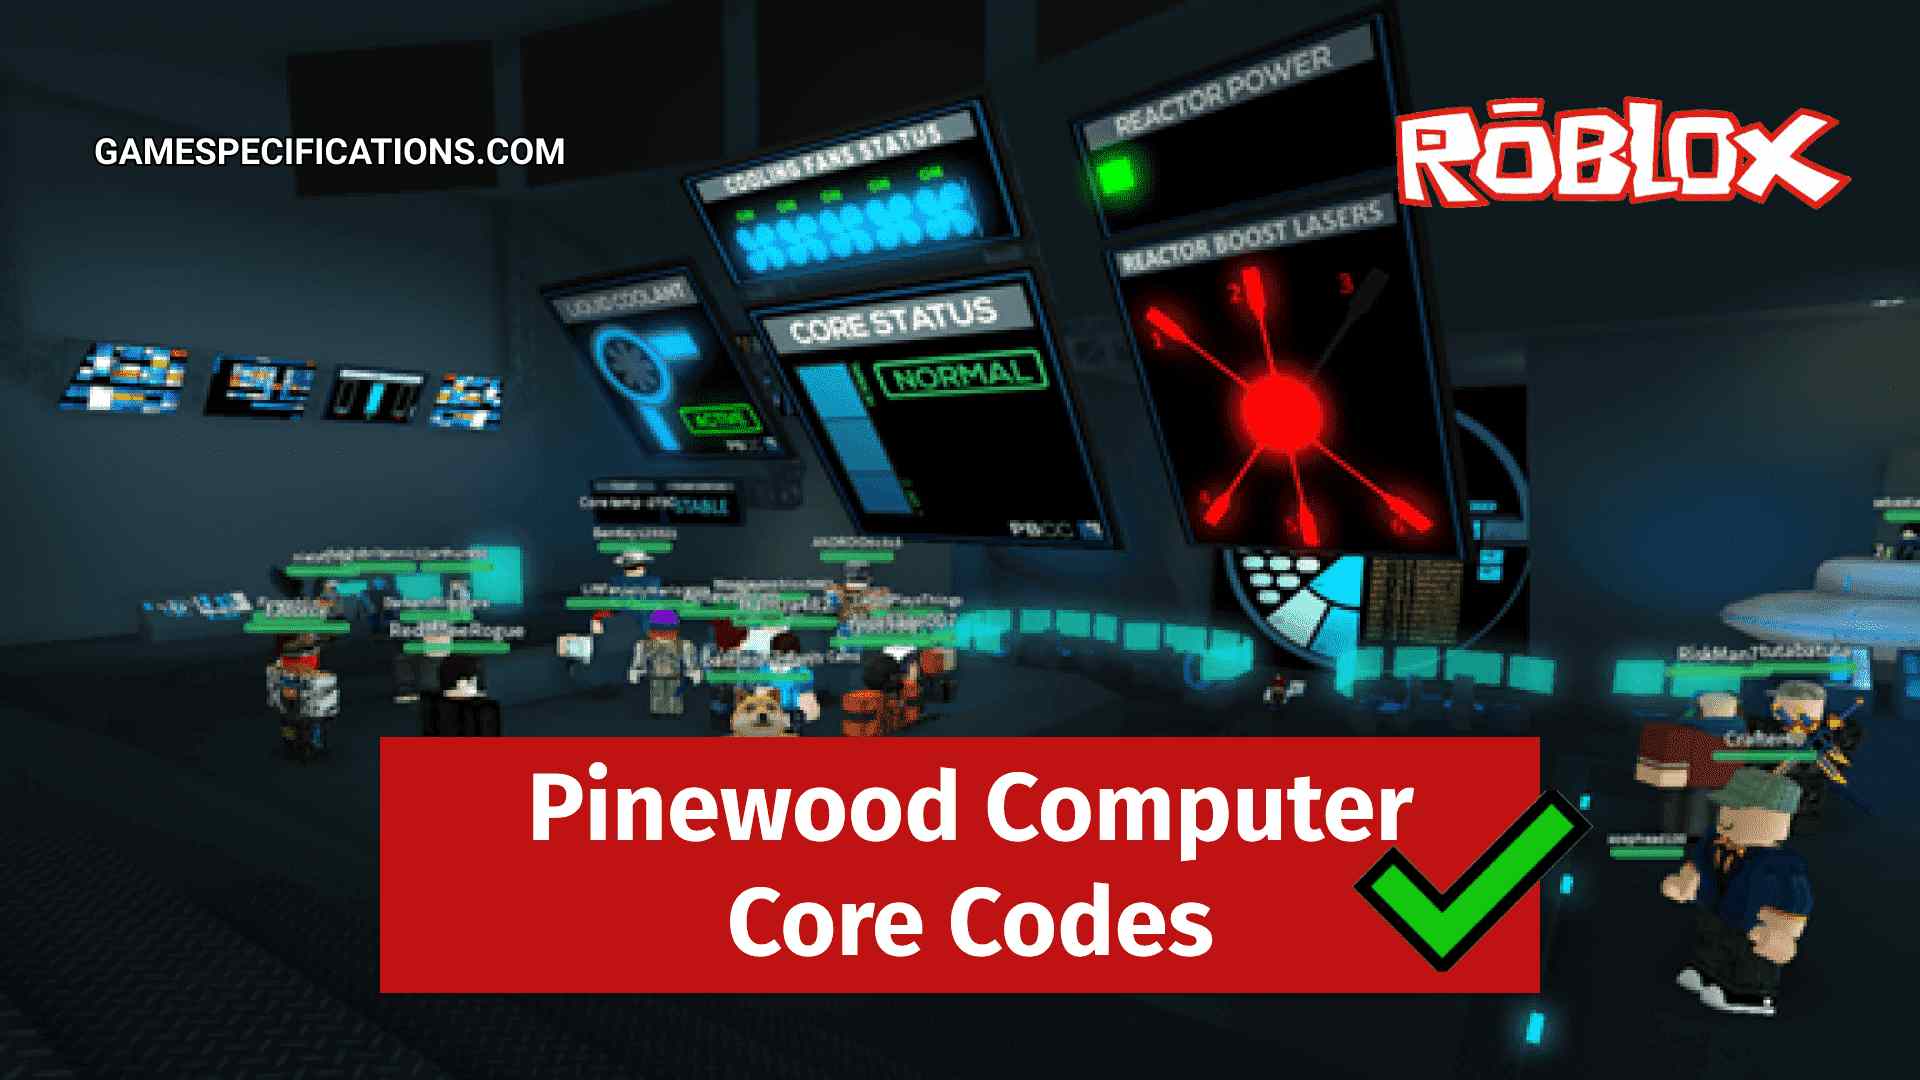 Roblox Pinewood Computer Core Codes July 2021 Game Specifications - roblox deathrun fortune teller